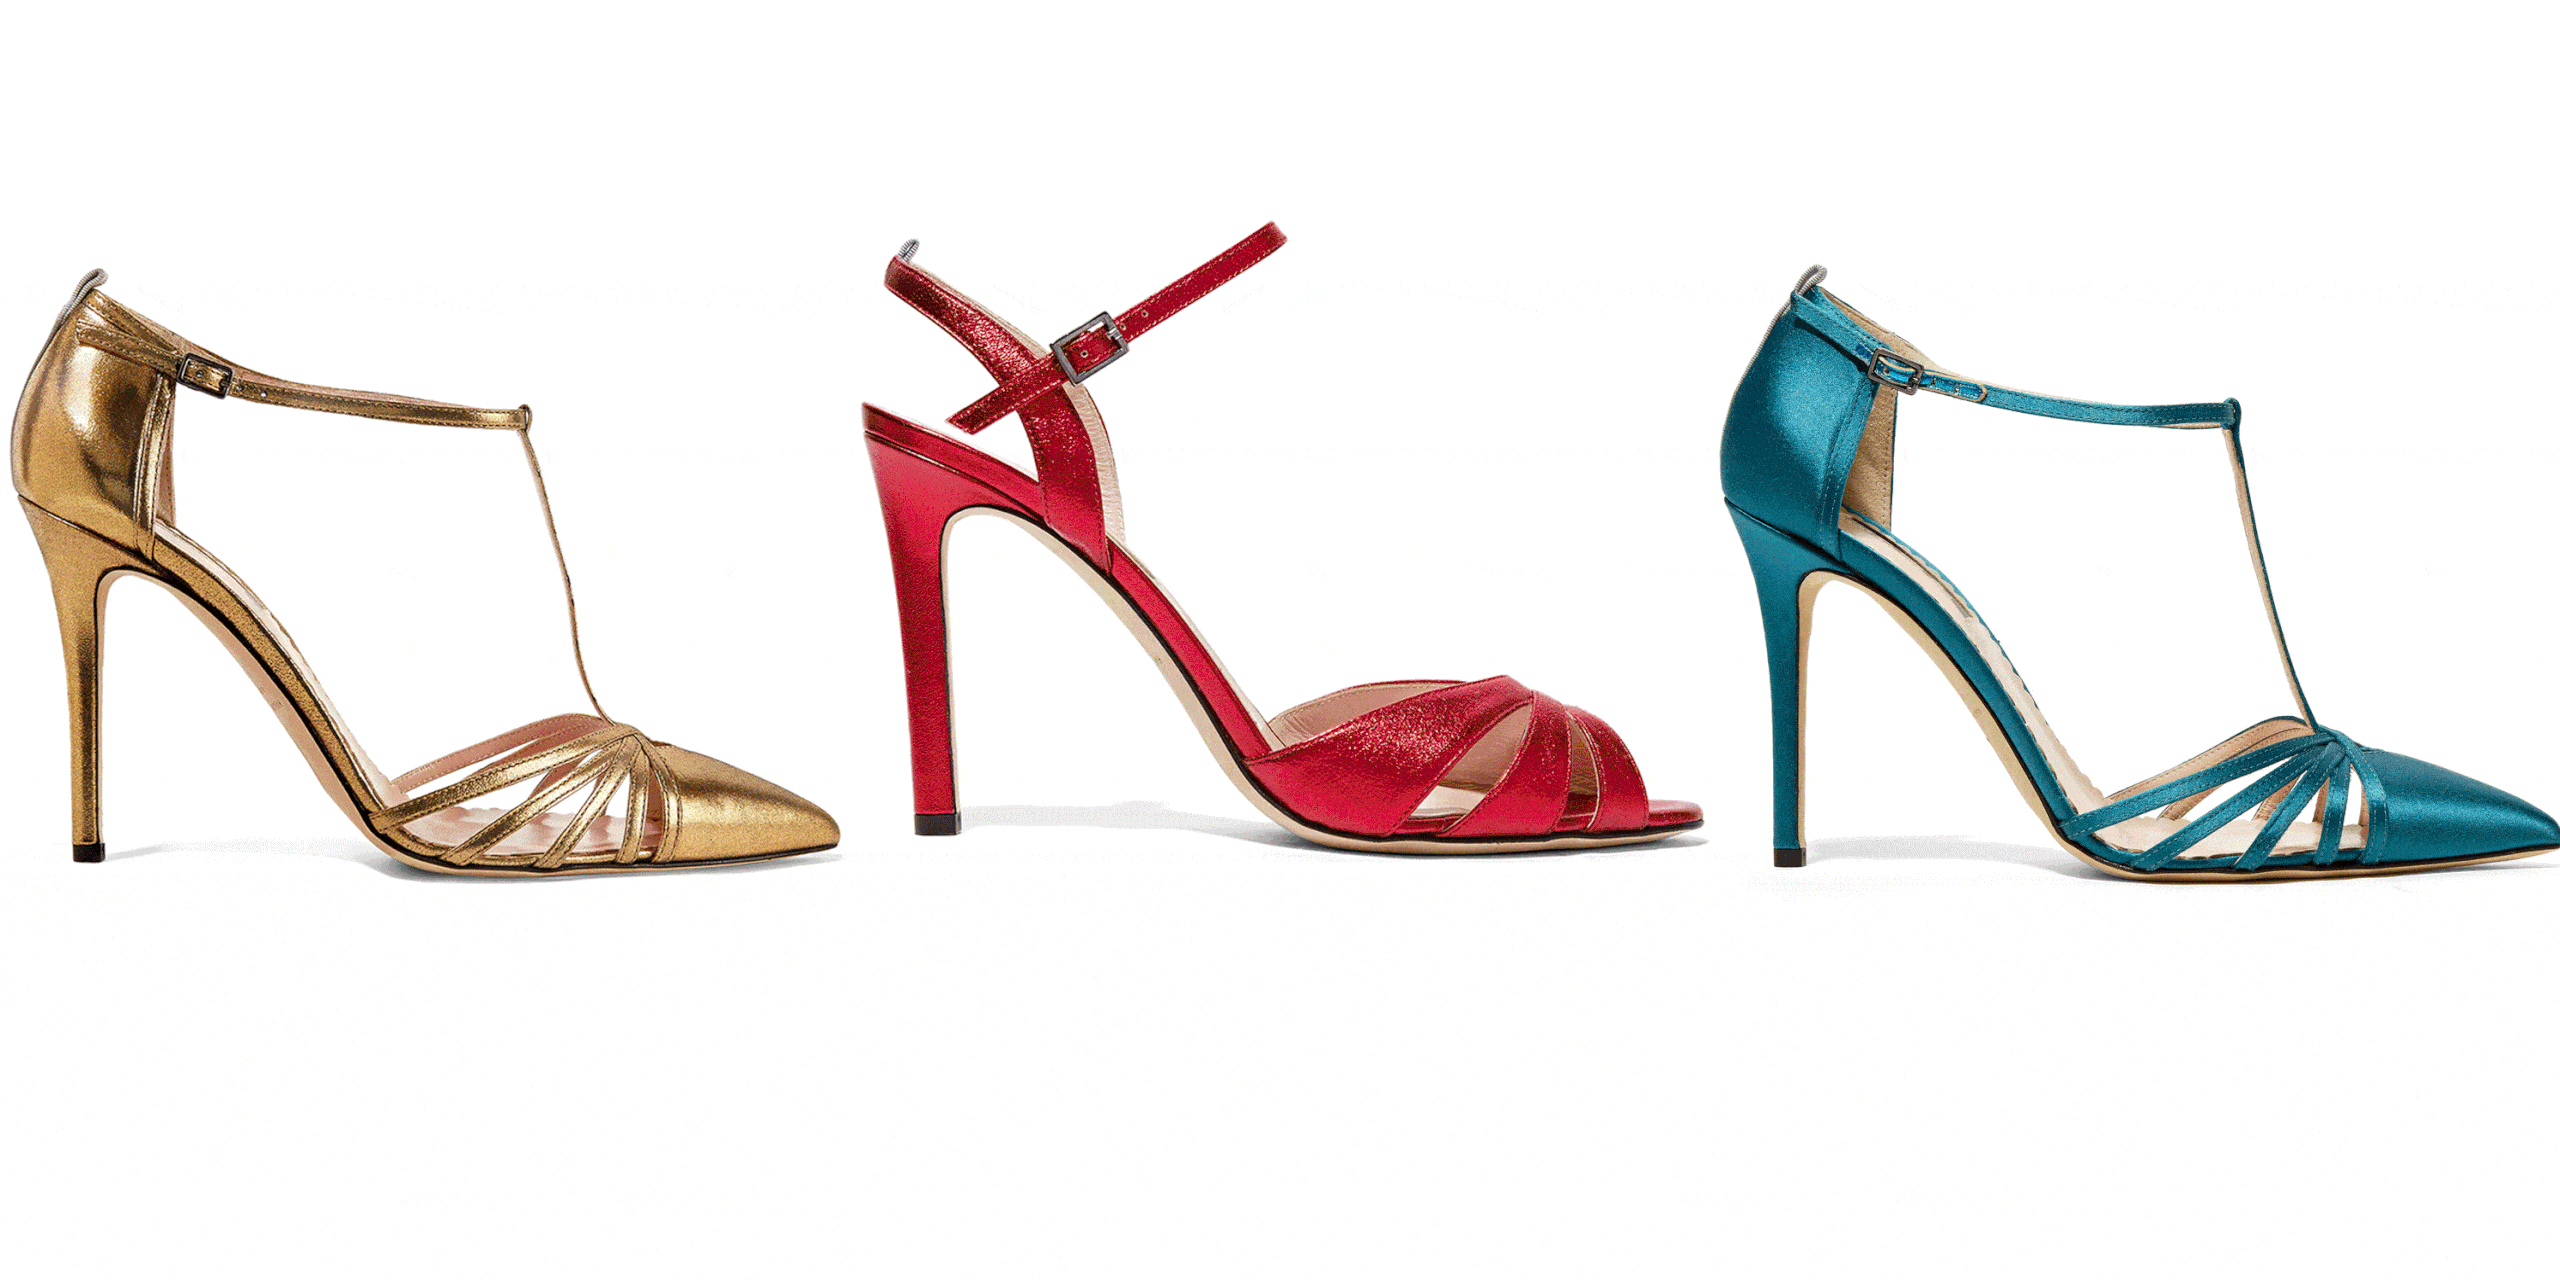 See SJP's New Very Carrie Bradshaw Shoe Collection - Flipboard